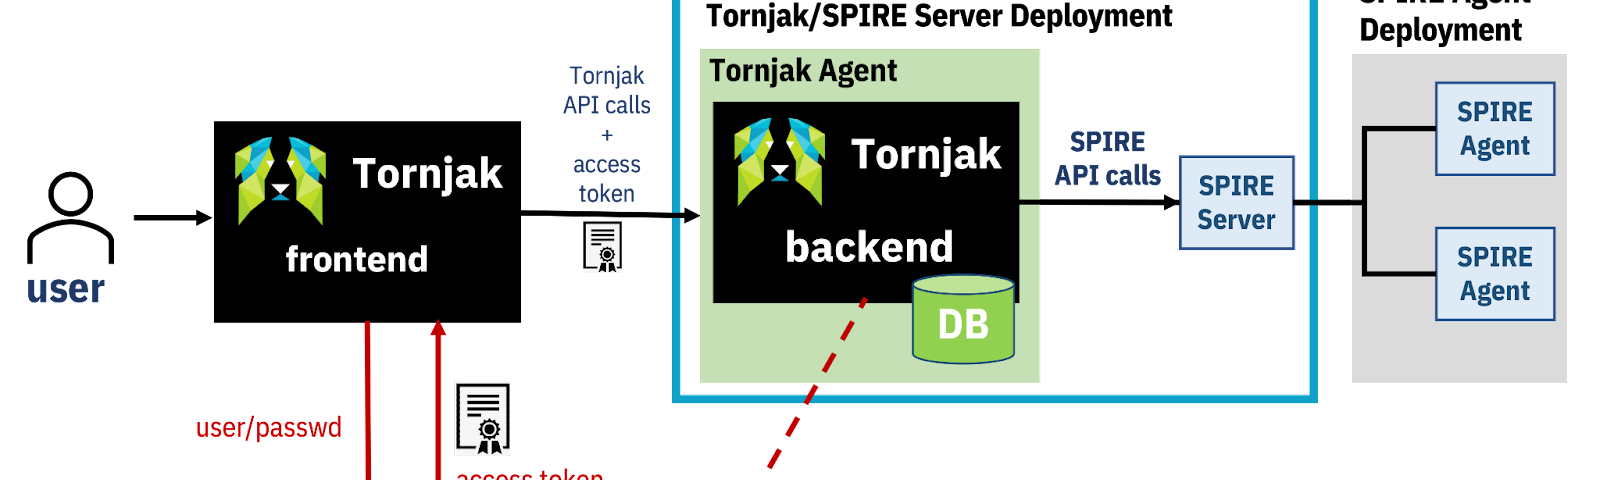 The typical Tornjak architecture, where the Auth server receives user credentials and gives access tokens to the frontend. The frontend sends the access tokens to the backend with each API call, and the backend can view public Auth server keys.